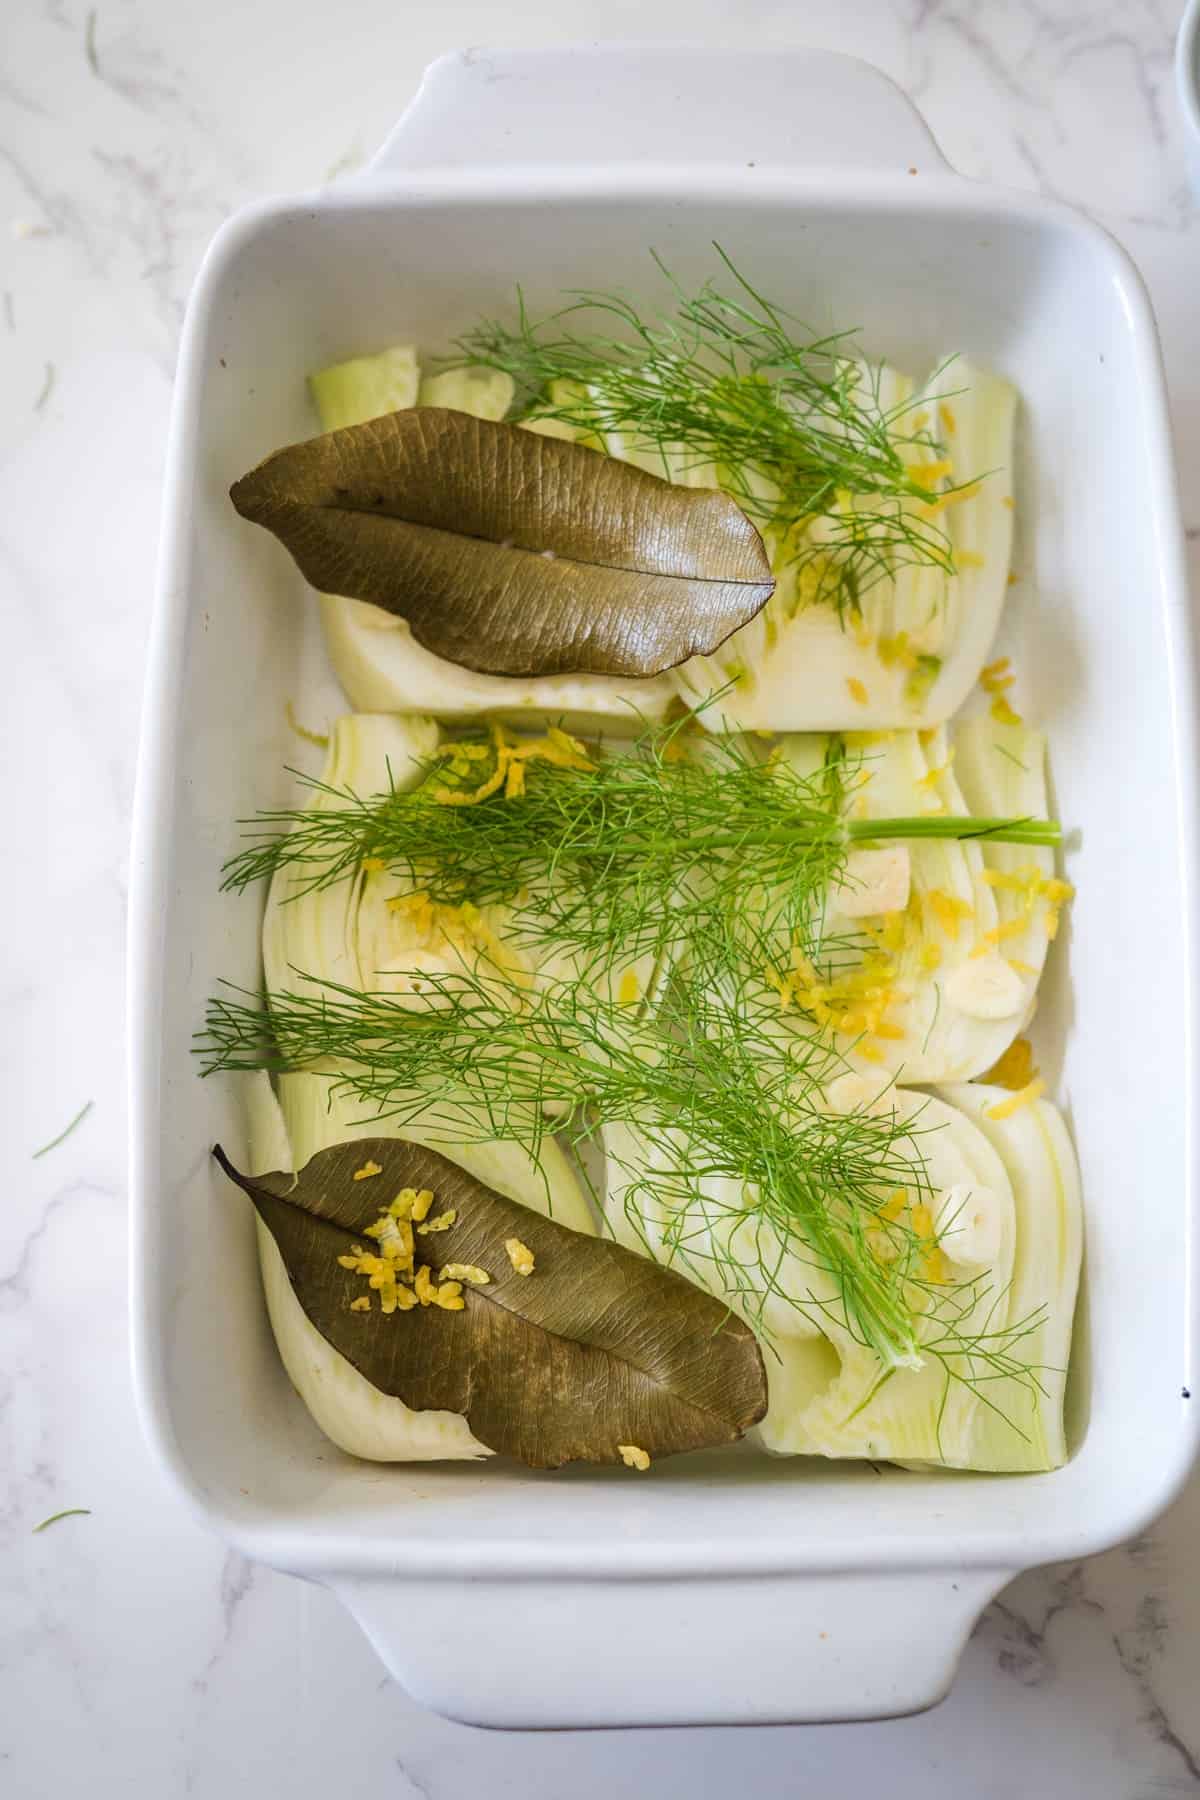 Baking dish containing fennel confit and leeks topped with fresh dill and bay leaves, ready for cooking.